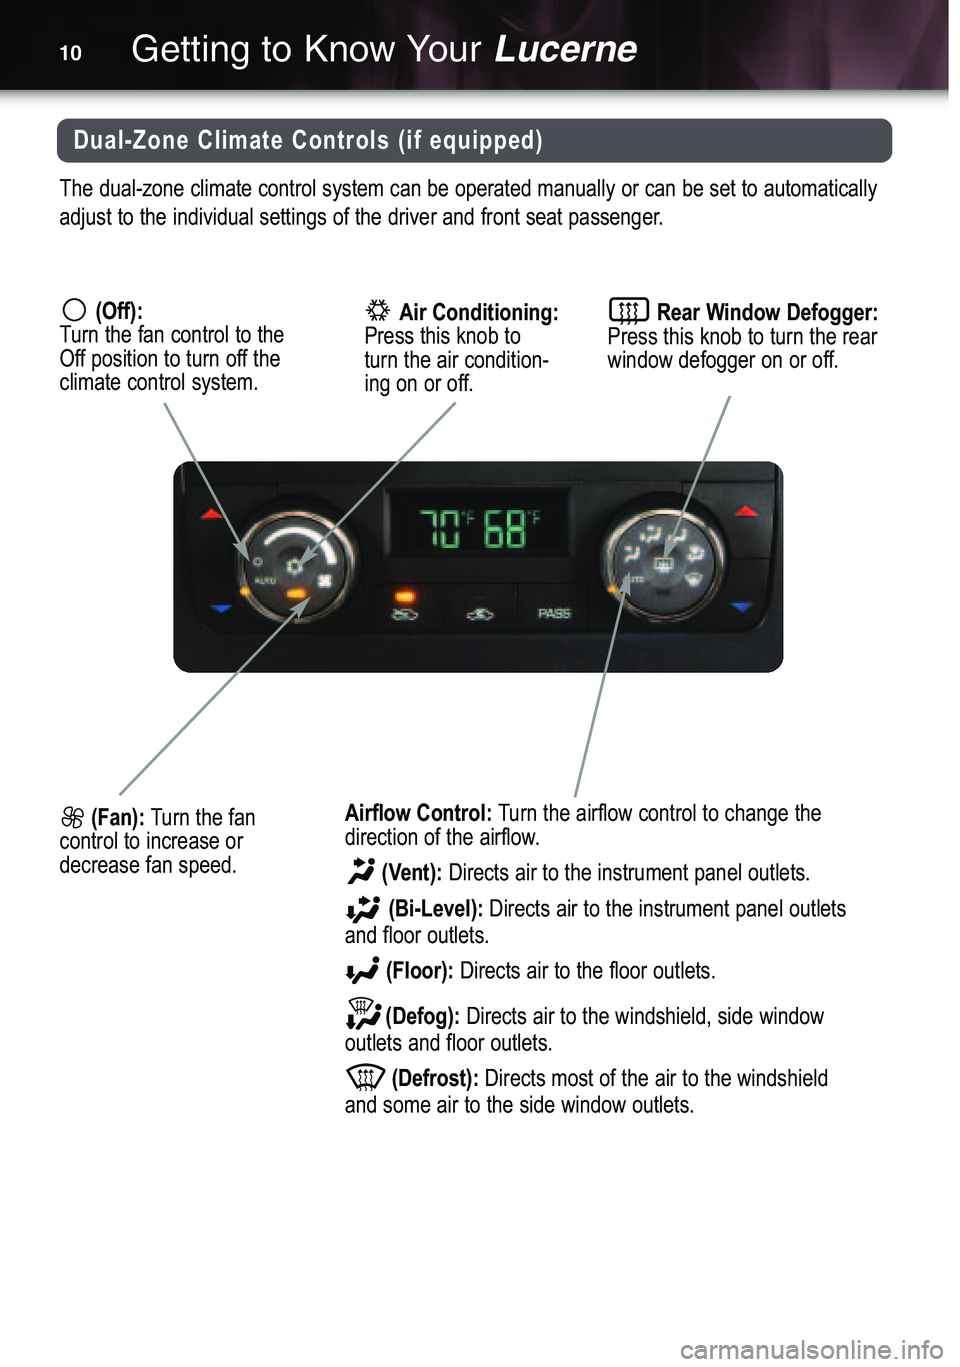 BUICK LUCERNE 2007  Get To Know Guide Getting to Know YourLucerne10
The dual�zone climate control system can be operated manually or can be set to automatically
adjust to the individual settings of the driver and front seat passenger.
Dua